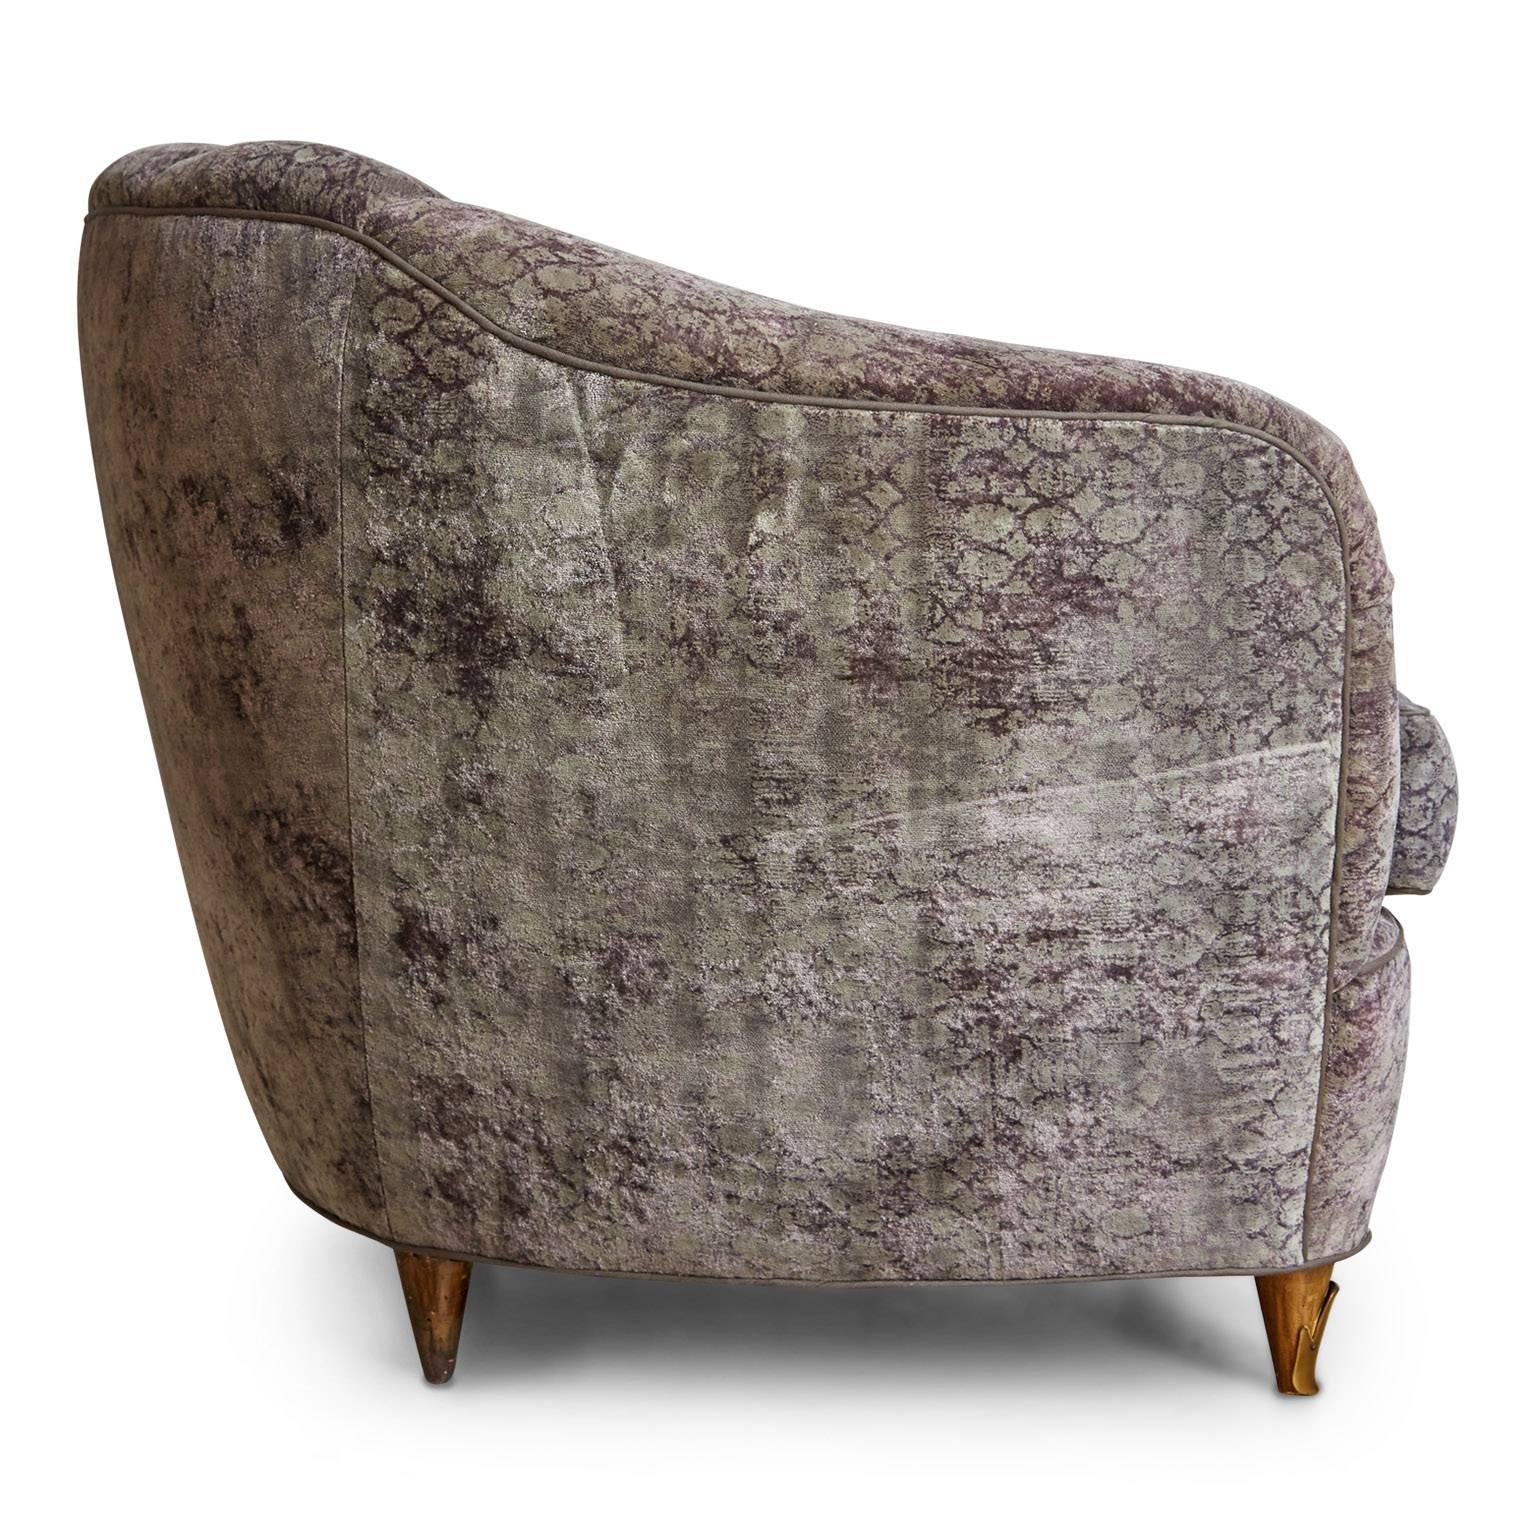 Highly detailed exquisite French Art Deco club chair that has been newly restored and reupholstered in a plush purple and grey silk velvet with subtle variations and use of pattern throughout. This gorgeous piece features a curved, ample padded